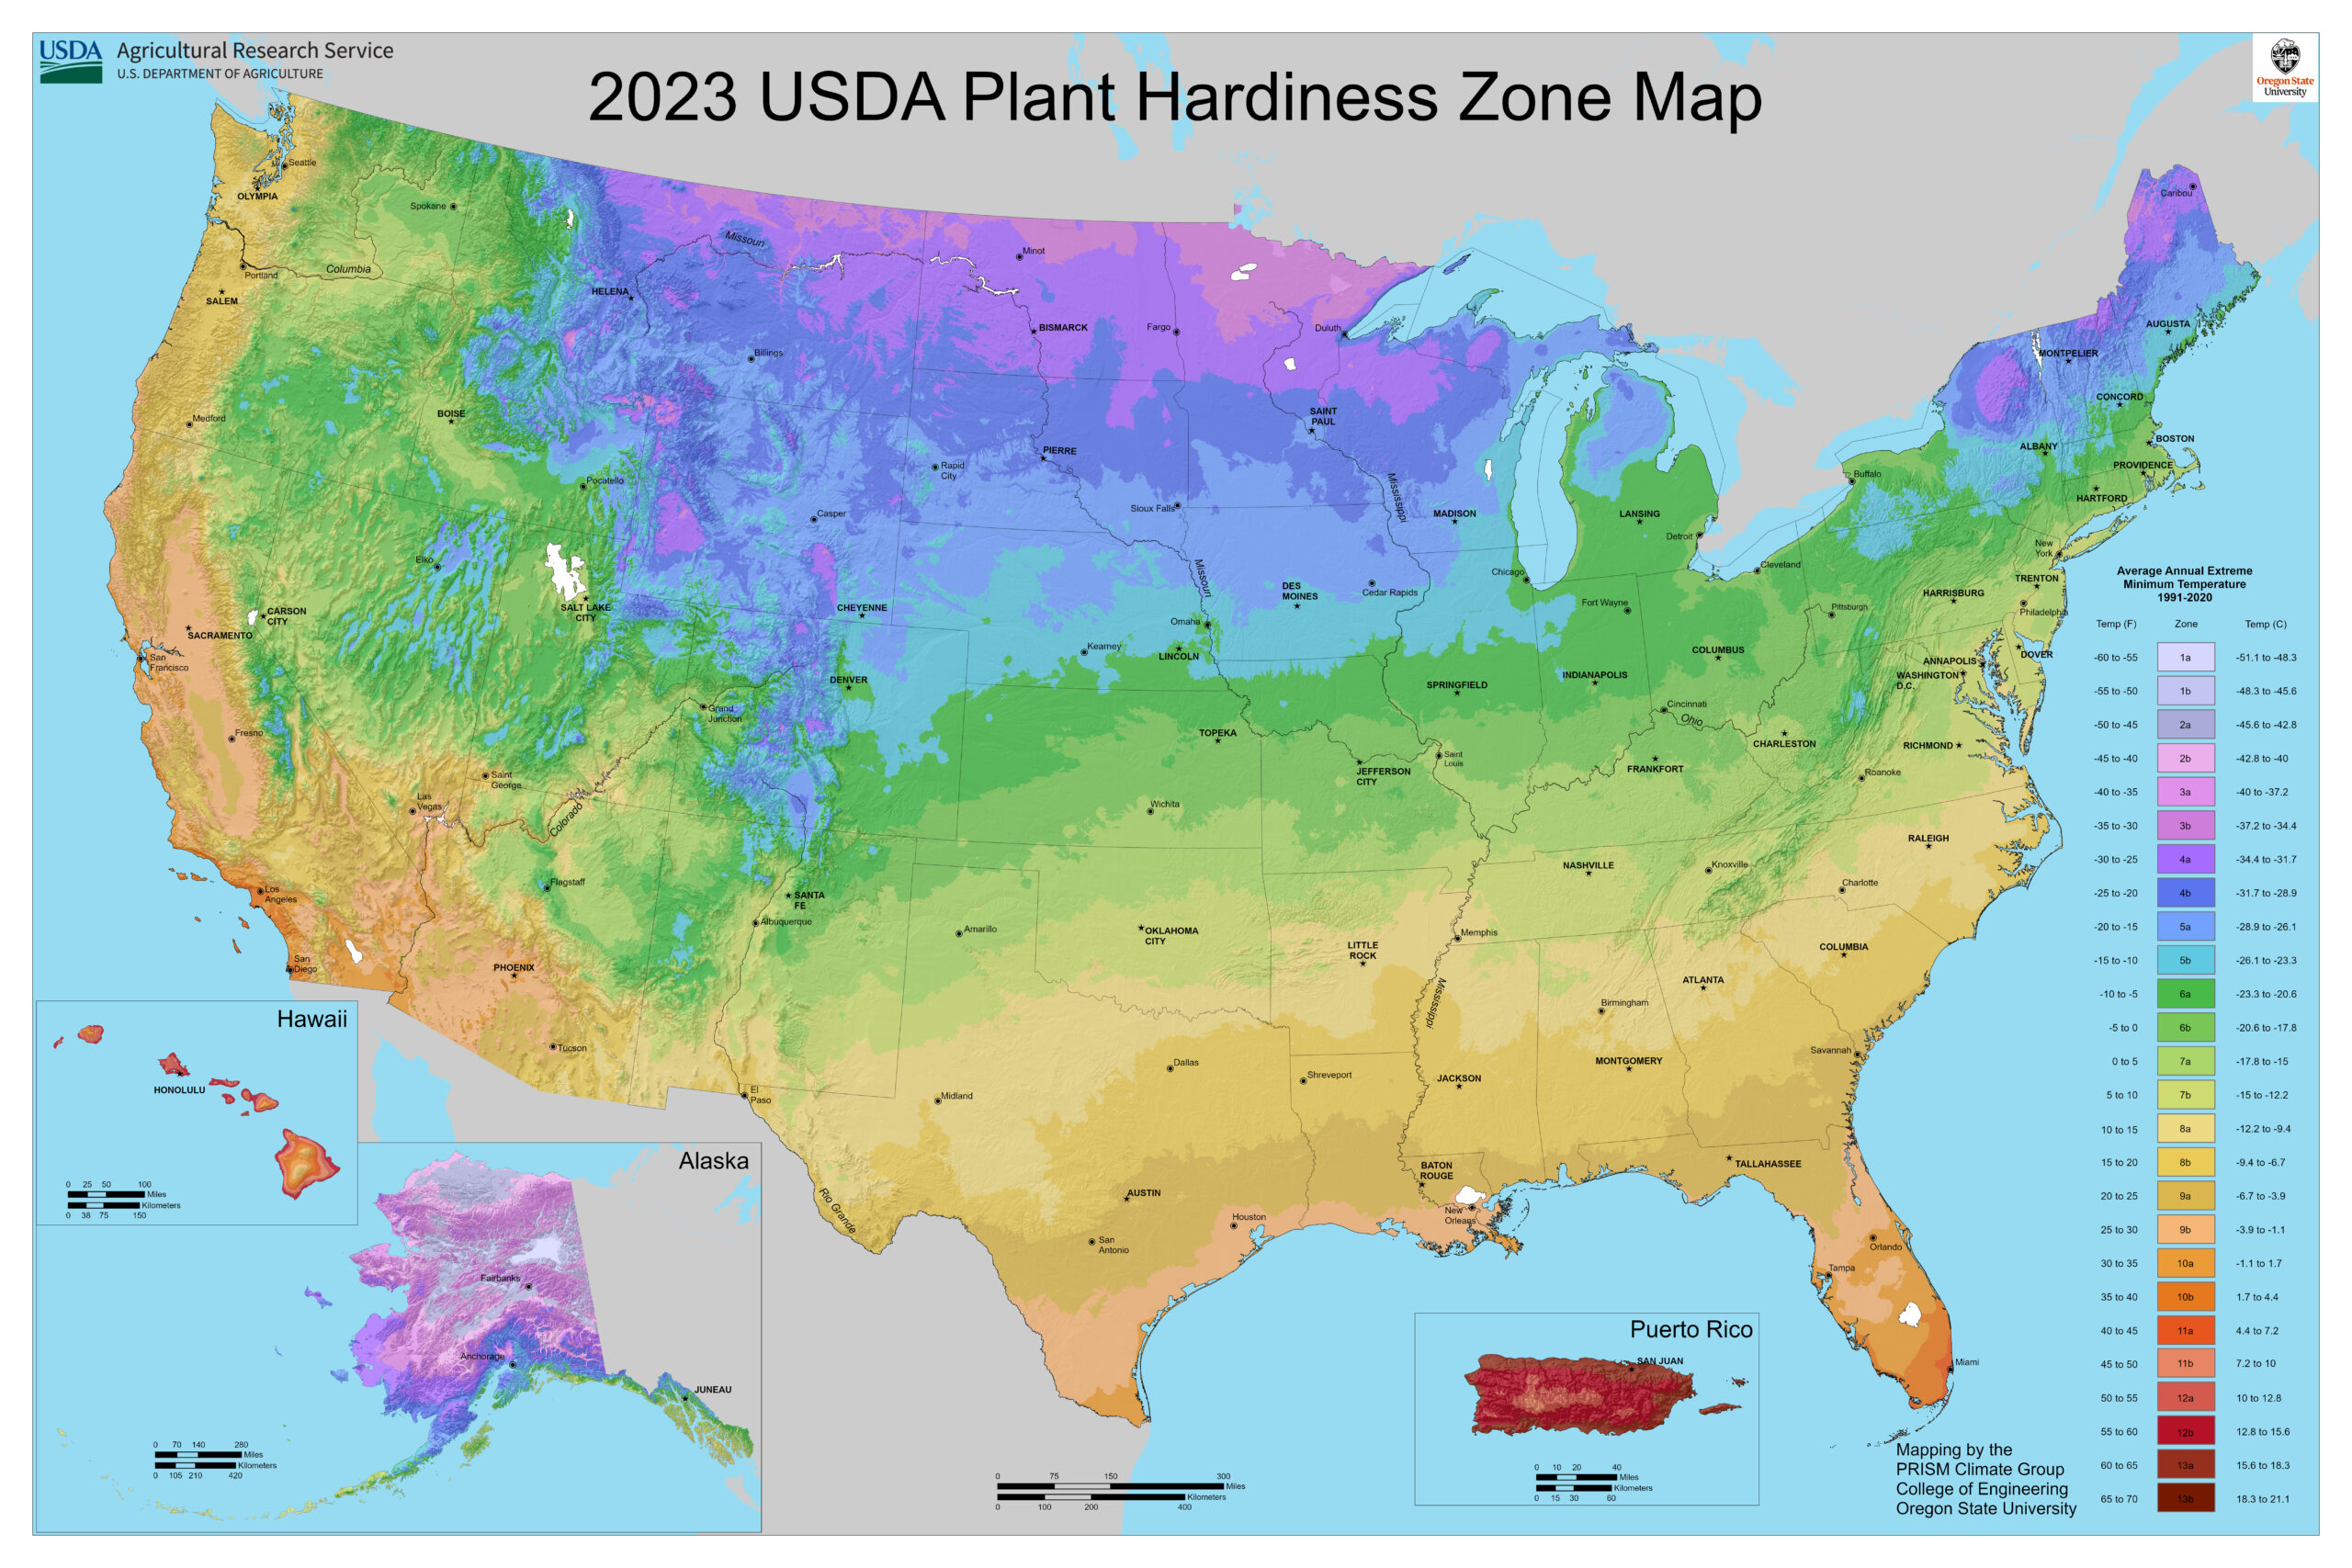 USDA Releases New Plant Hardiness Zone Map SeedSavers